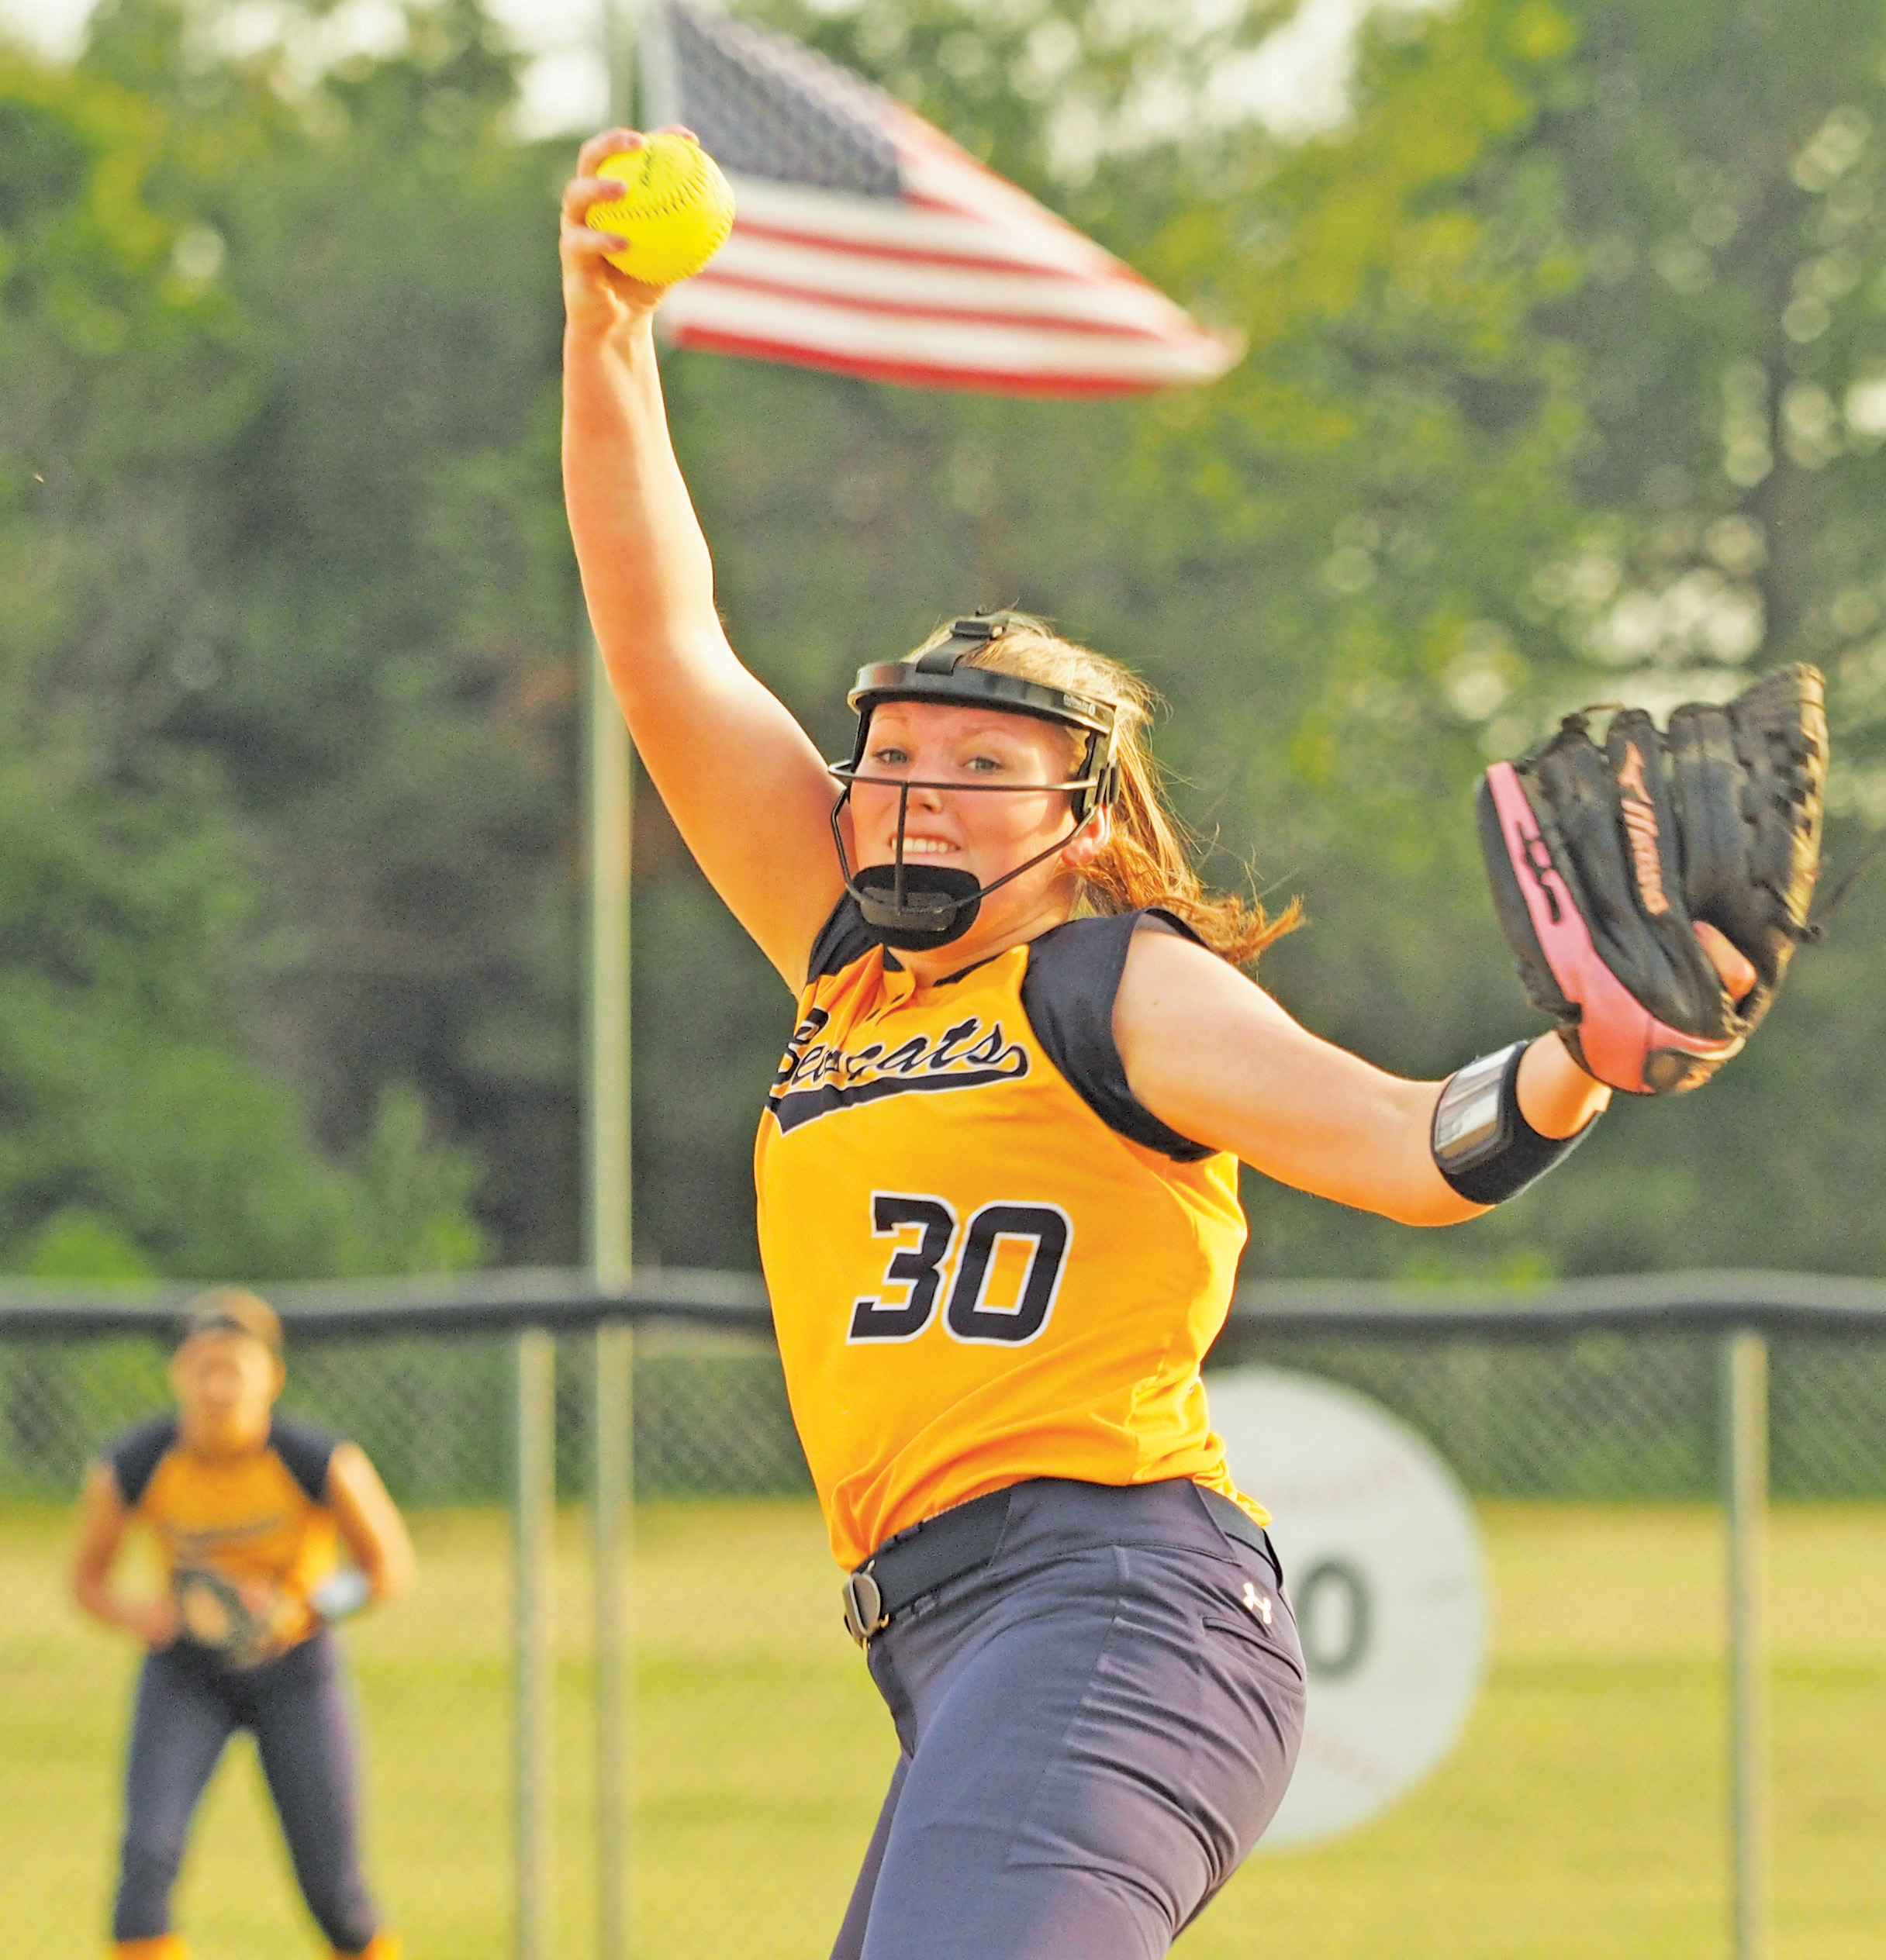 North Butler, Rockford softball players named to Class 1A All-State teams